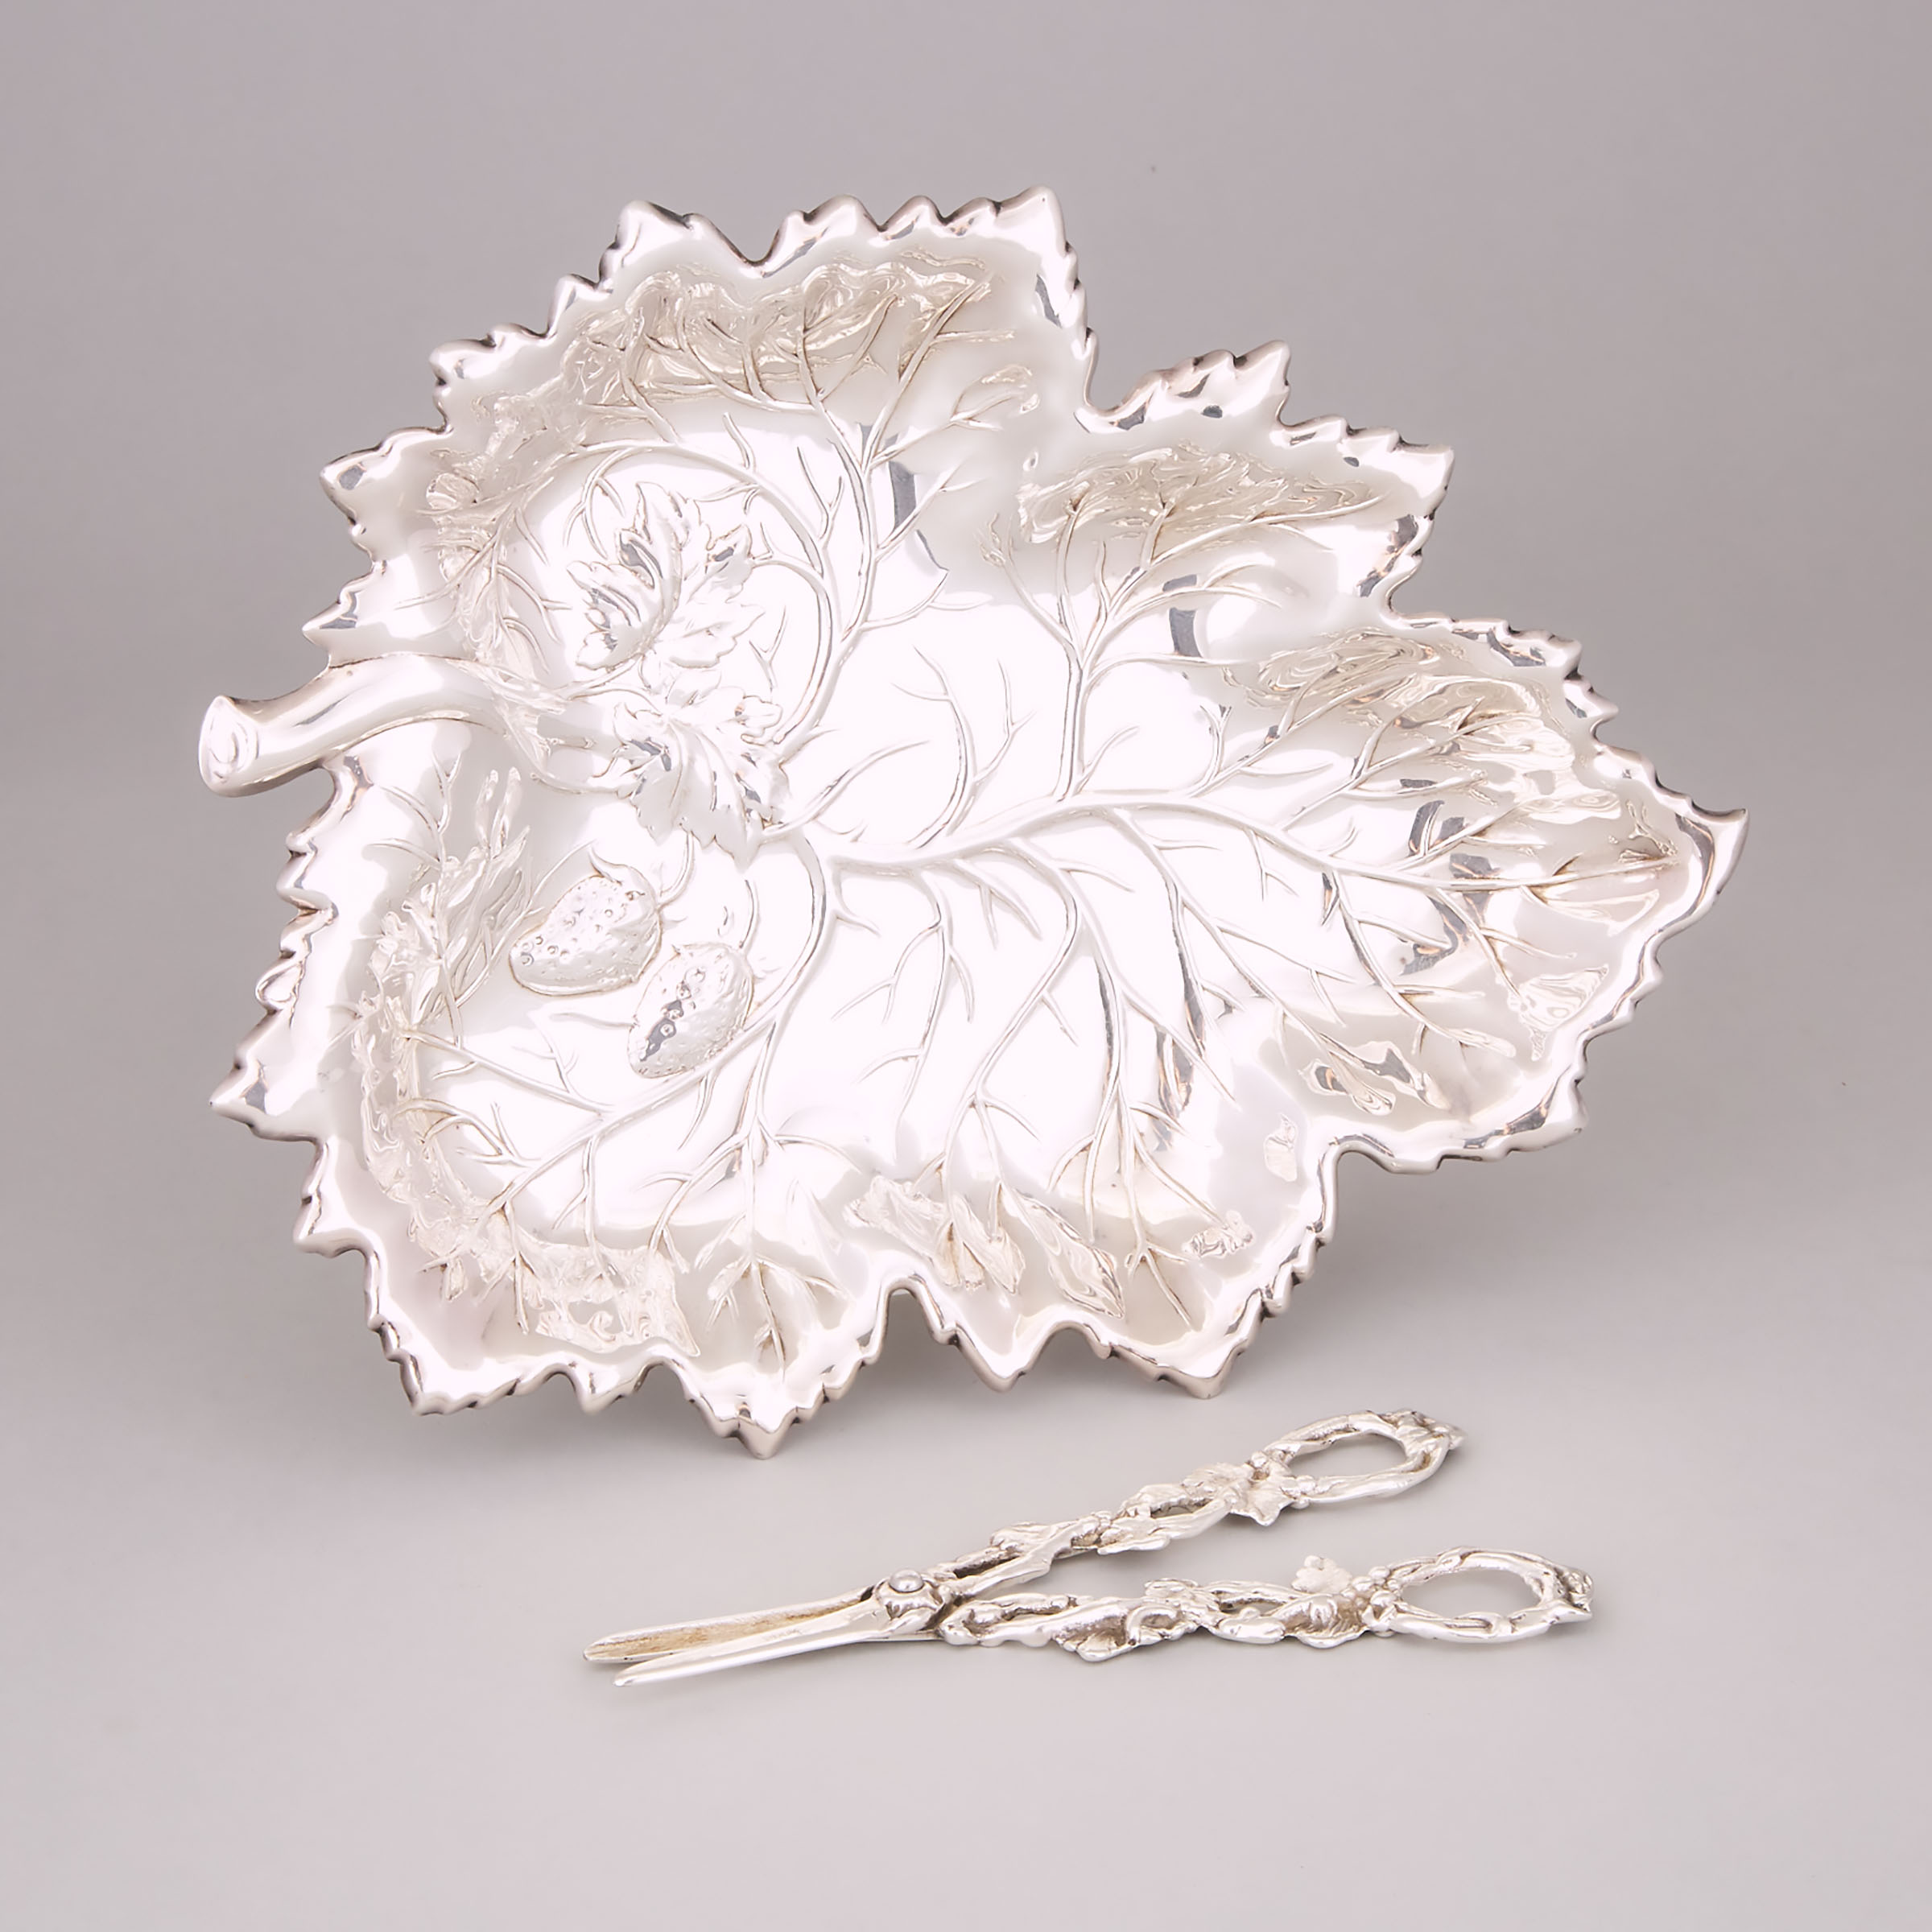 American Silver Strawberry Leaf Dish and Grape Shears, 20th century